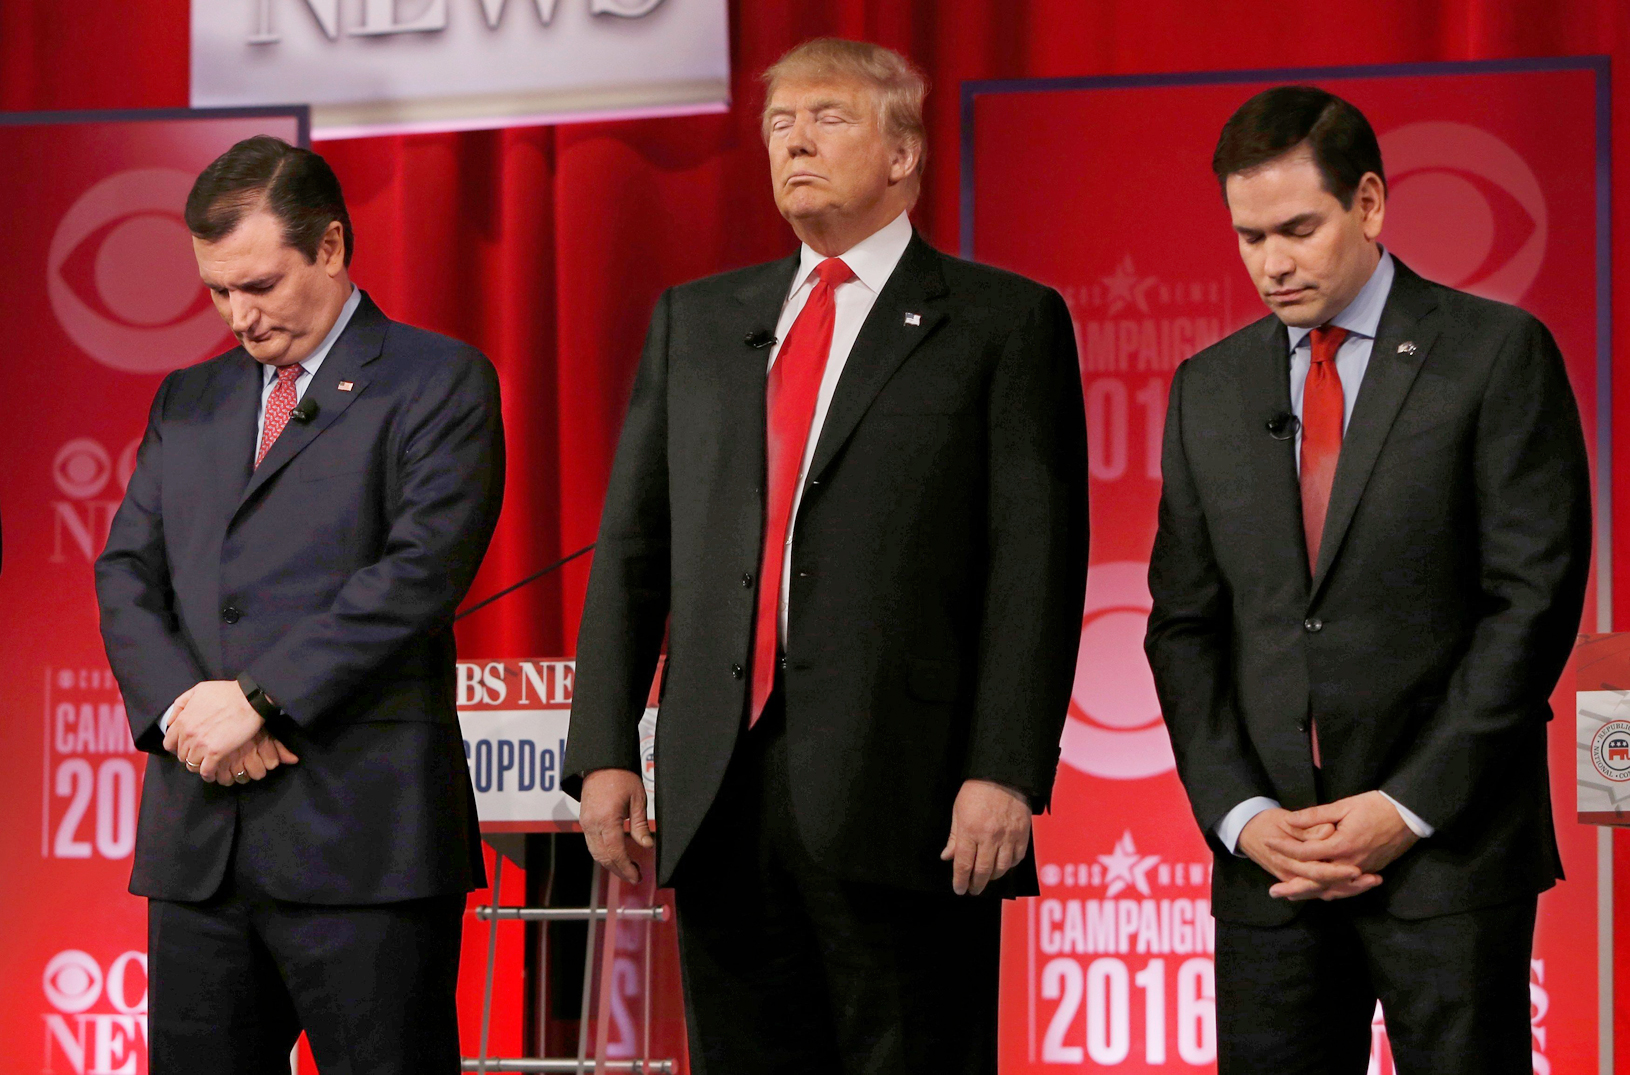 As Super Tuesday looms, Ted Cruz and Marco Rubio have lost valuable ground to Donald Trump (Jonathan Ernst—Reuters)